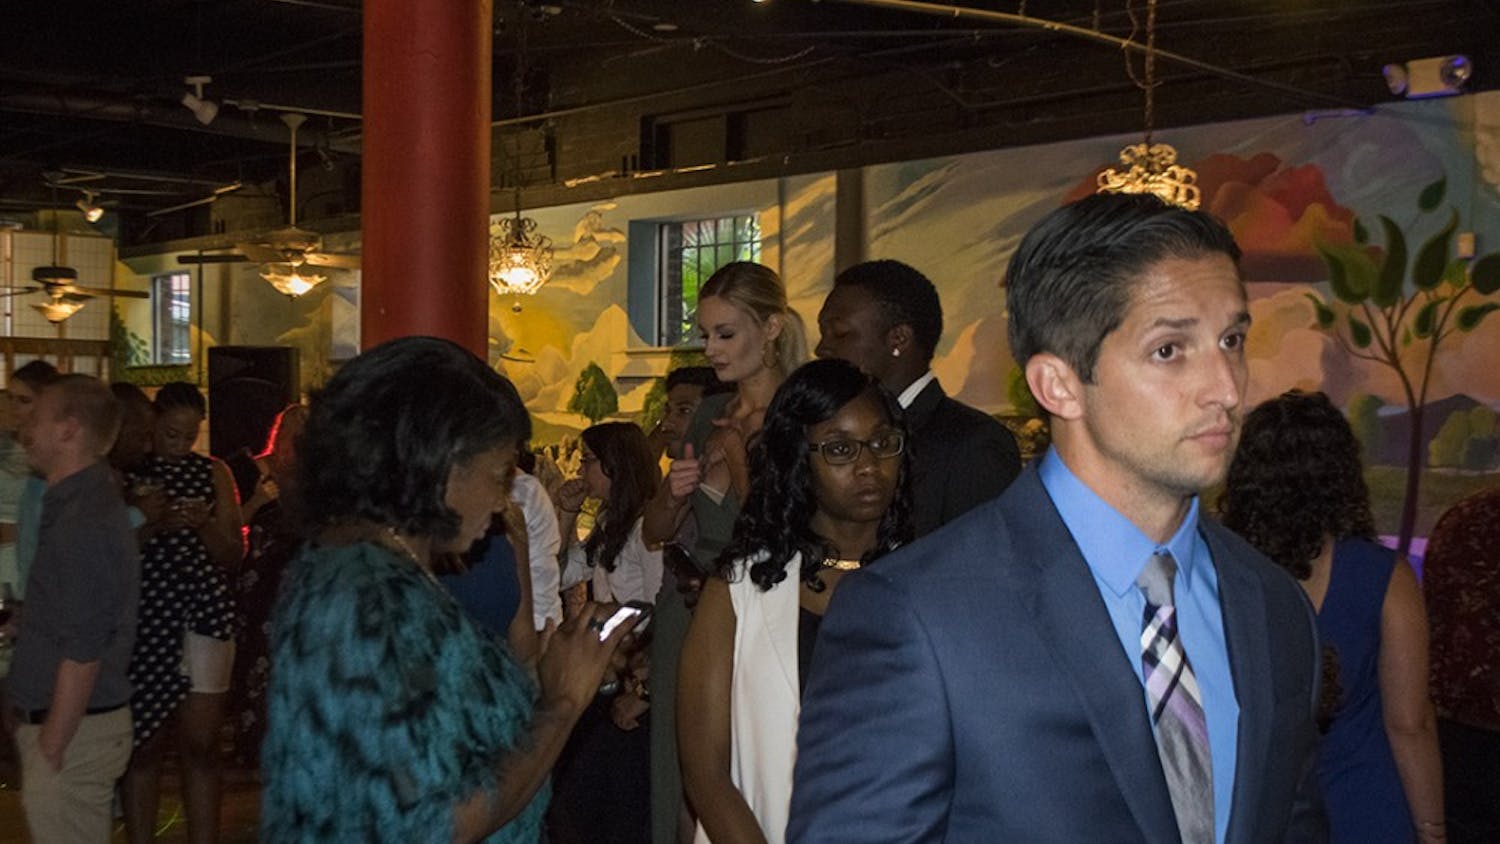 Fashion models and other citizens attend Columbia Fashion Week's "Beautiful People Party" to hear the 25 Most Stylish People in Columbia announced.